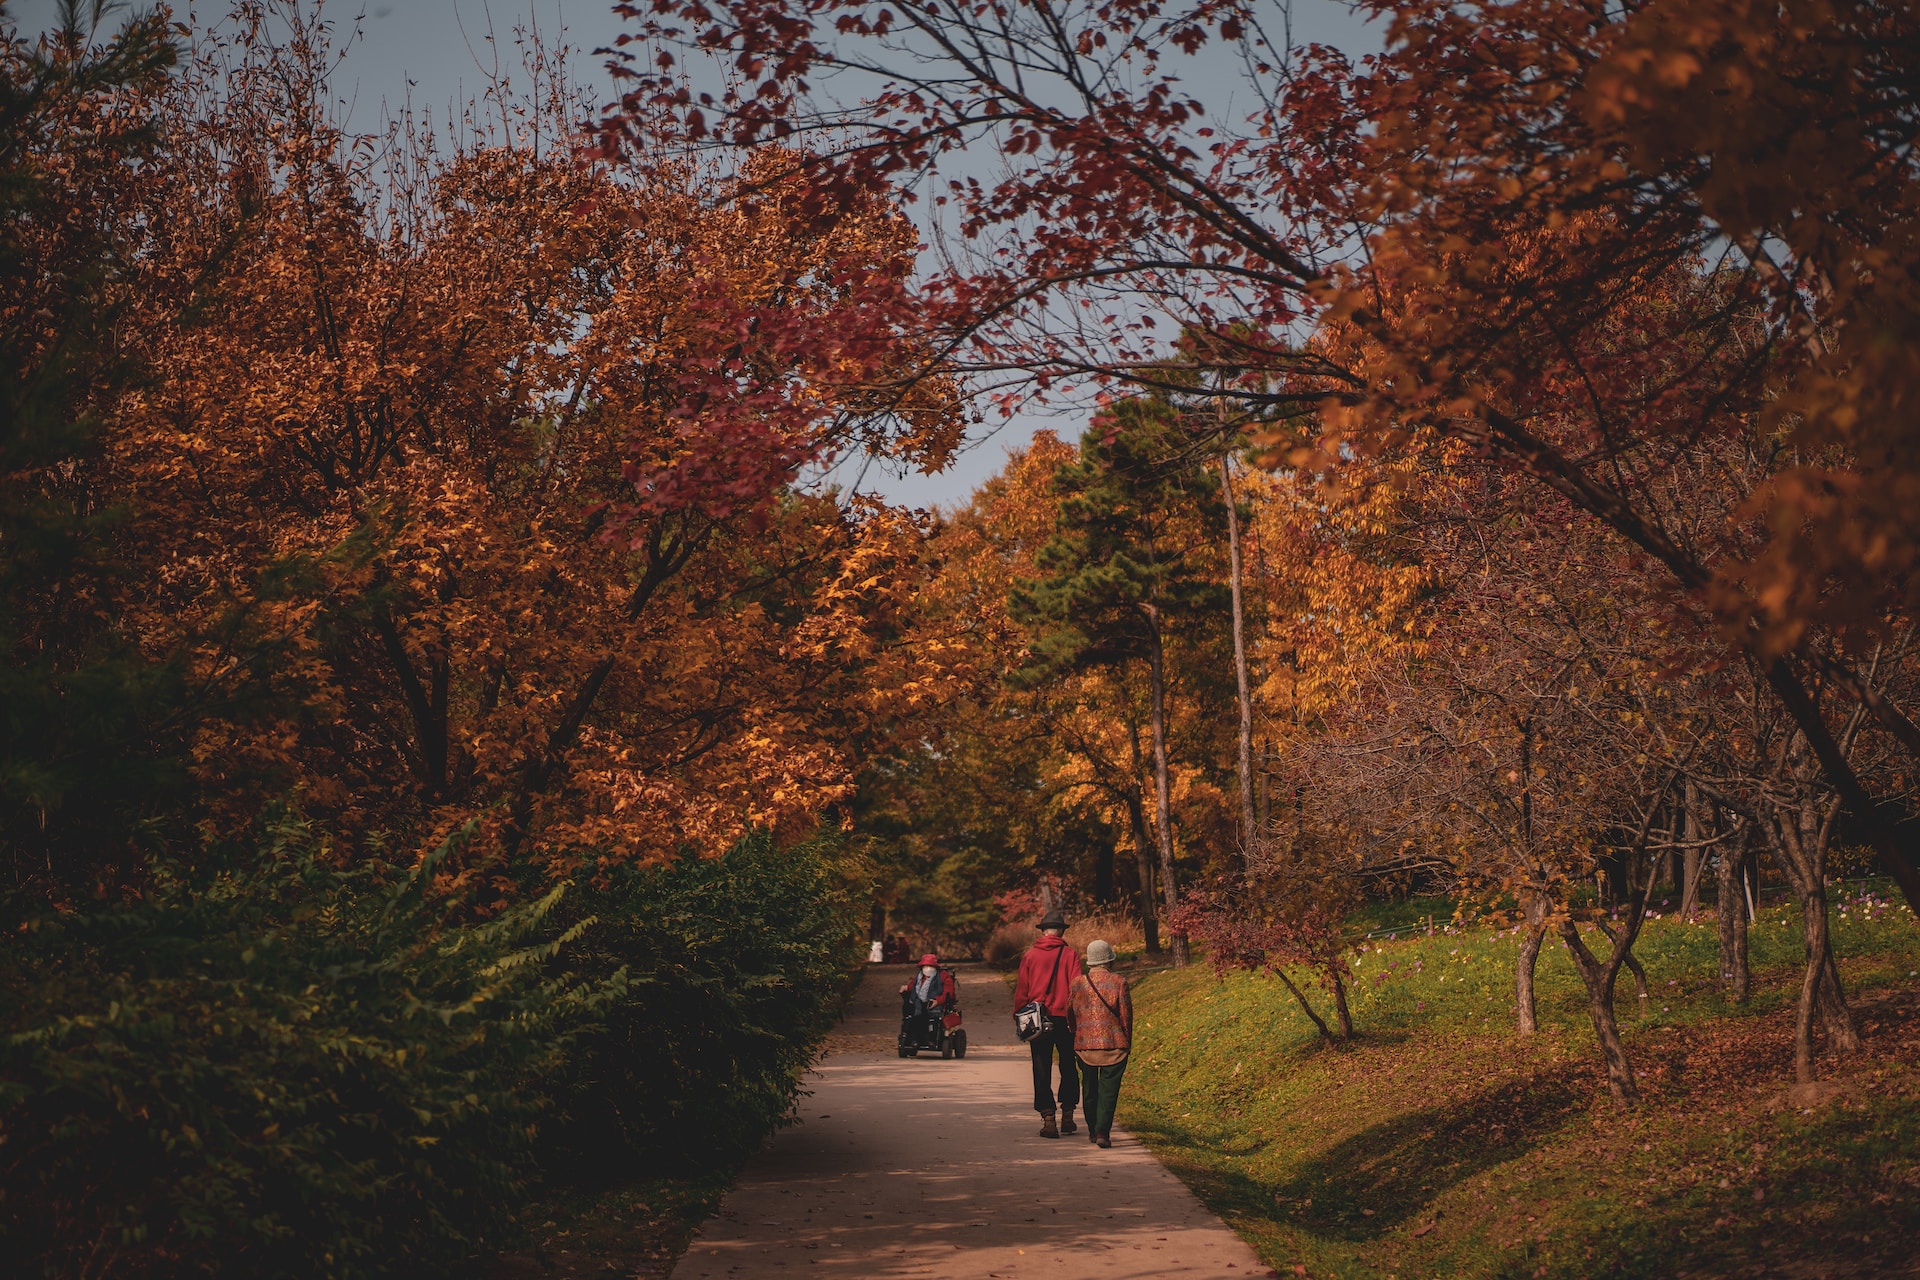 people walking, person in wheelchair, leaves are changing color. Image by Unsplash